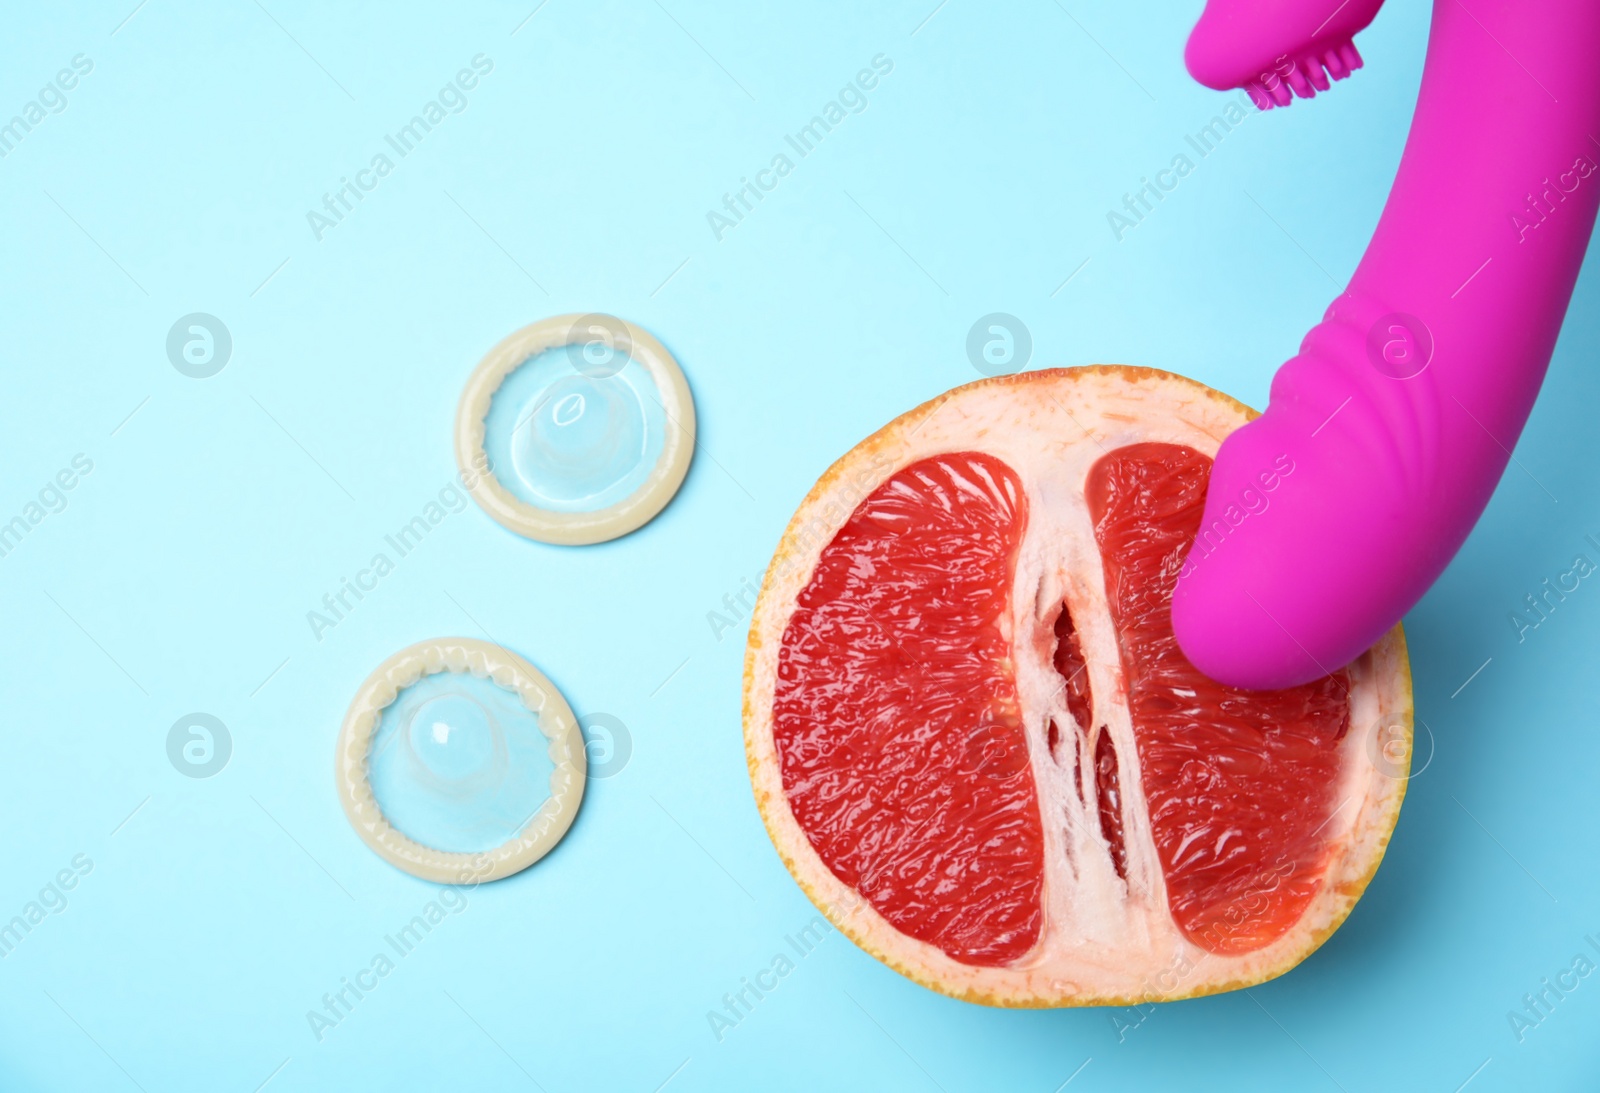 Photo of Half of grapefruit, purple vibrator and condoms on blue background, flat lay. Sex concept